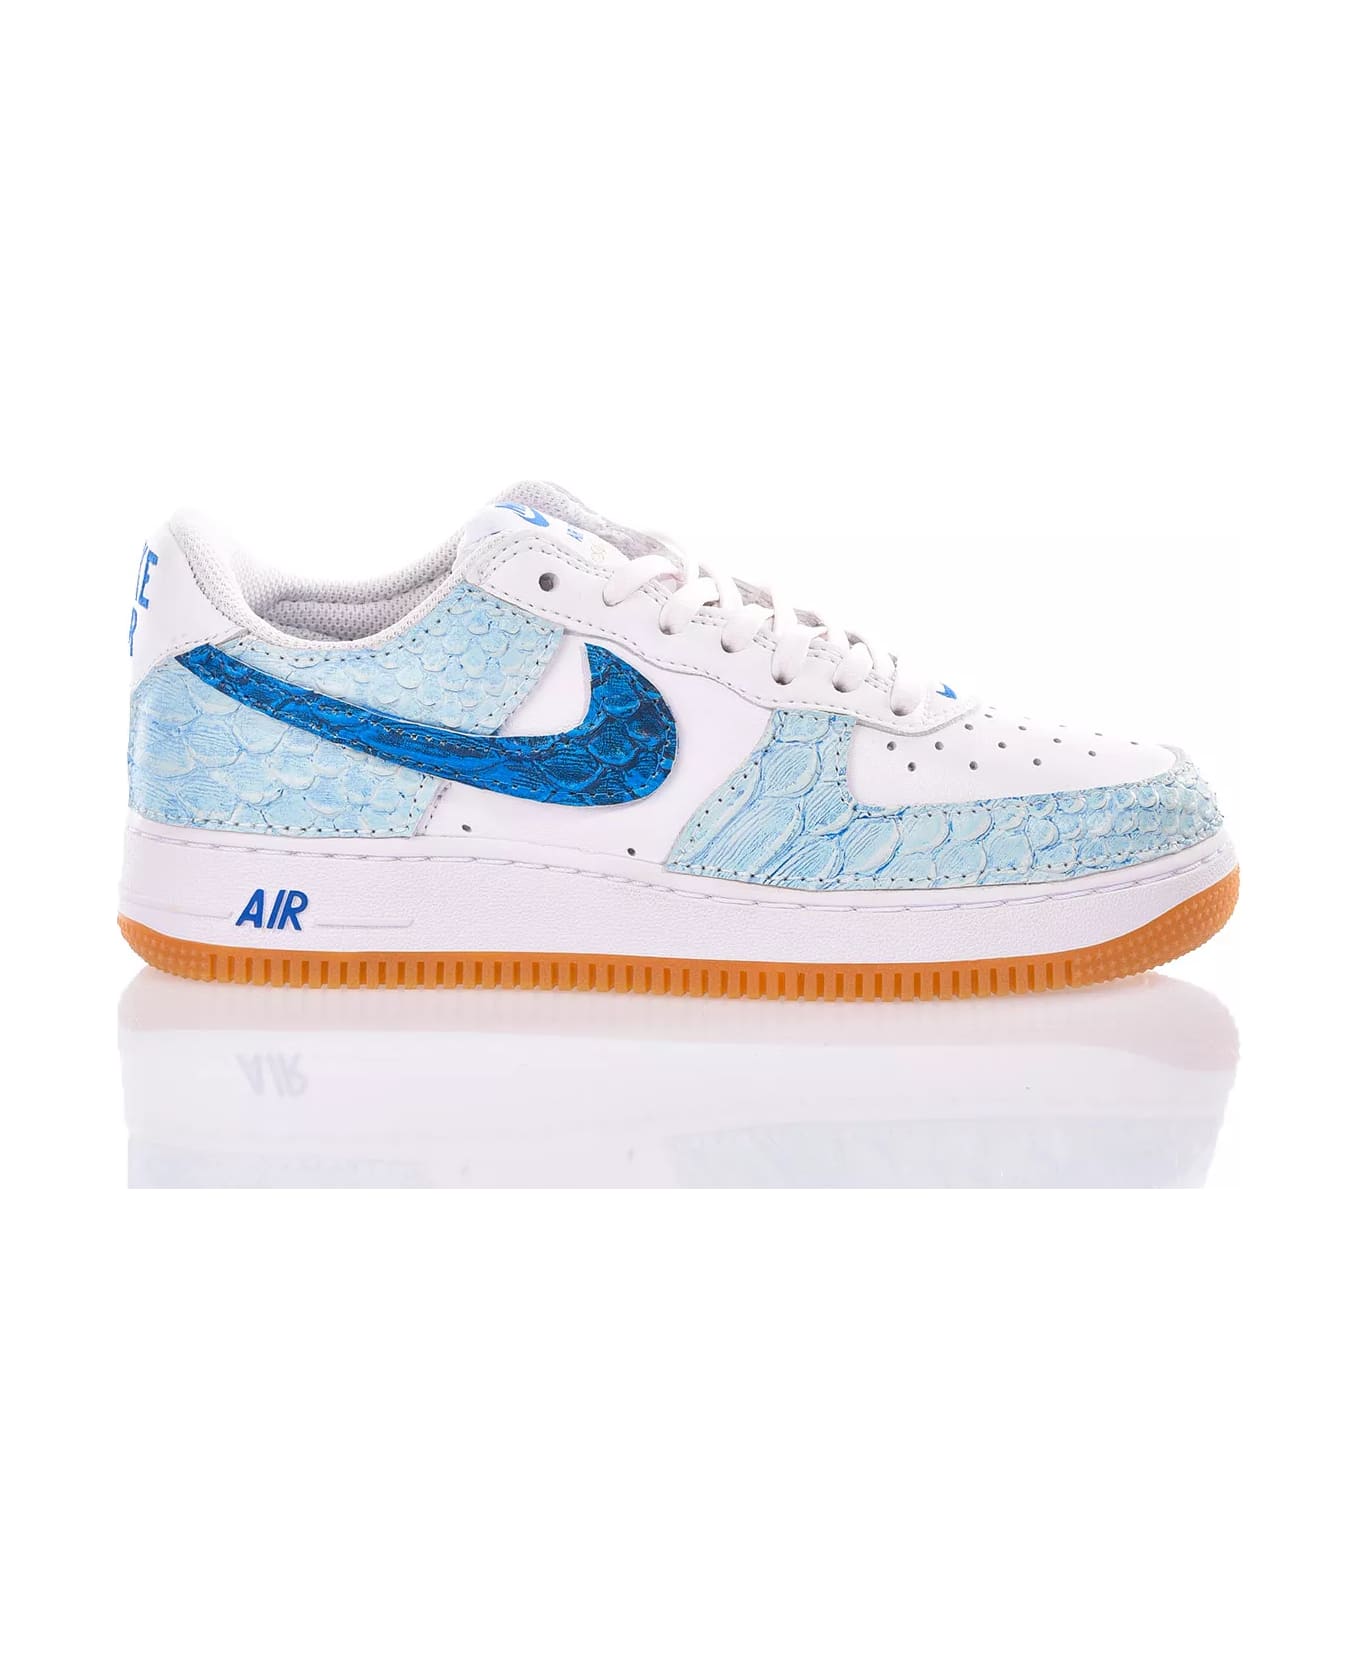 Mimanera Nike Air Force 1 Celestial With Blue Swoosh スニーカー